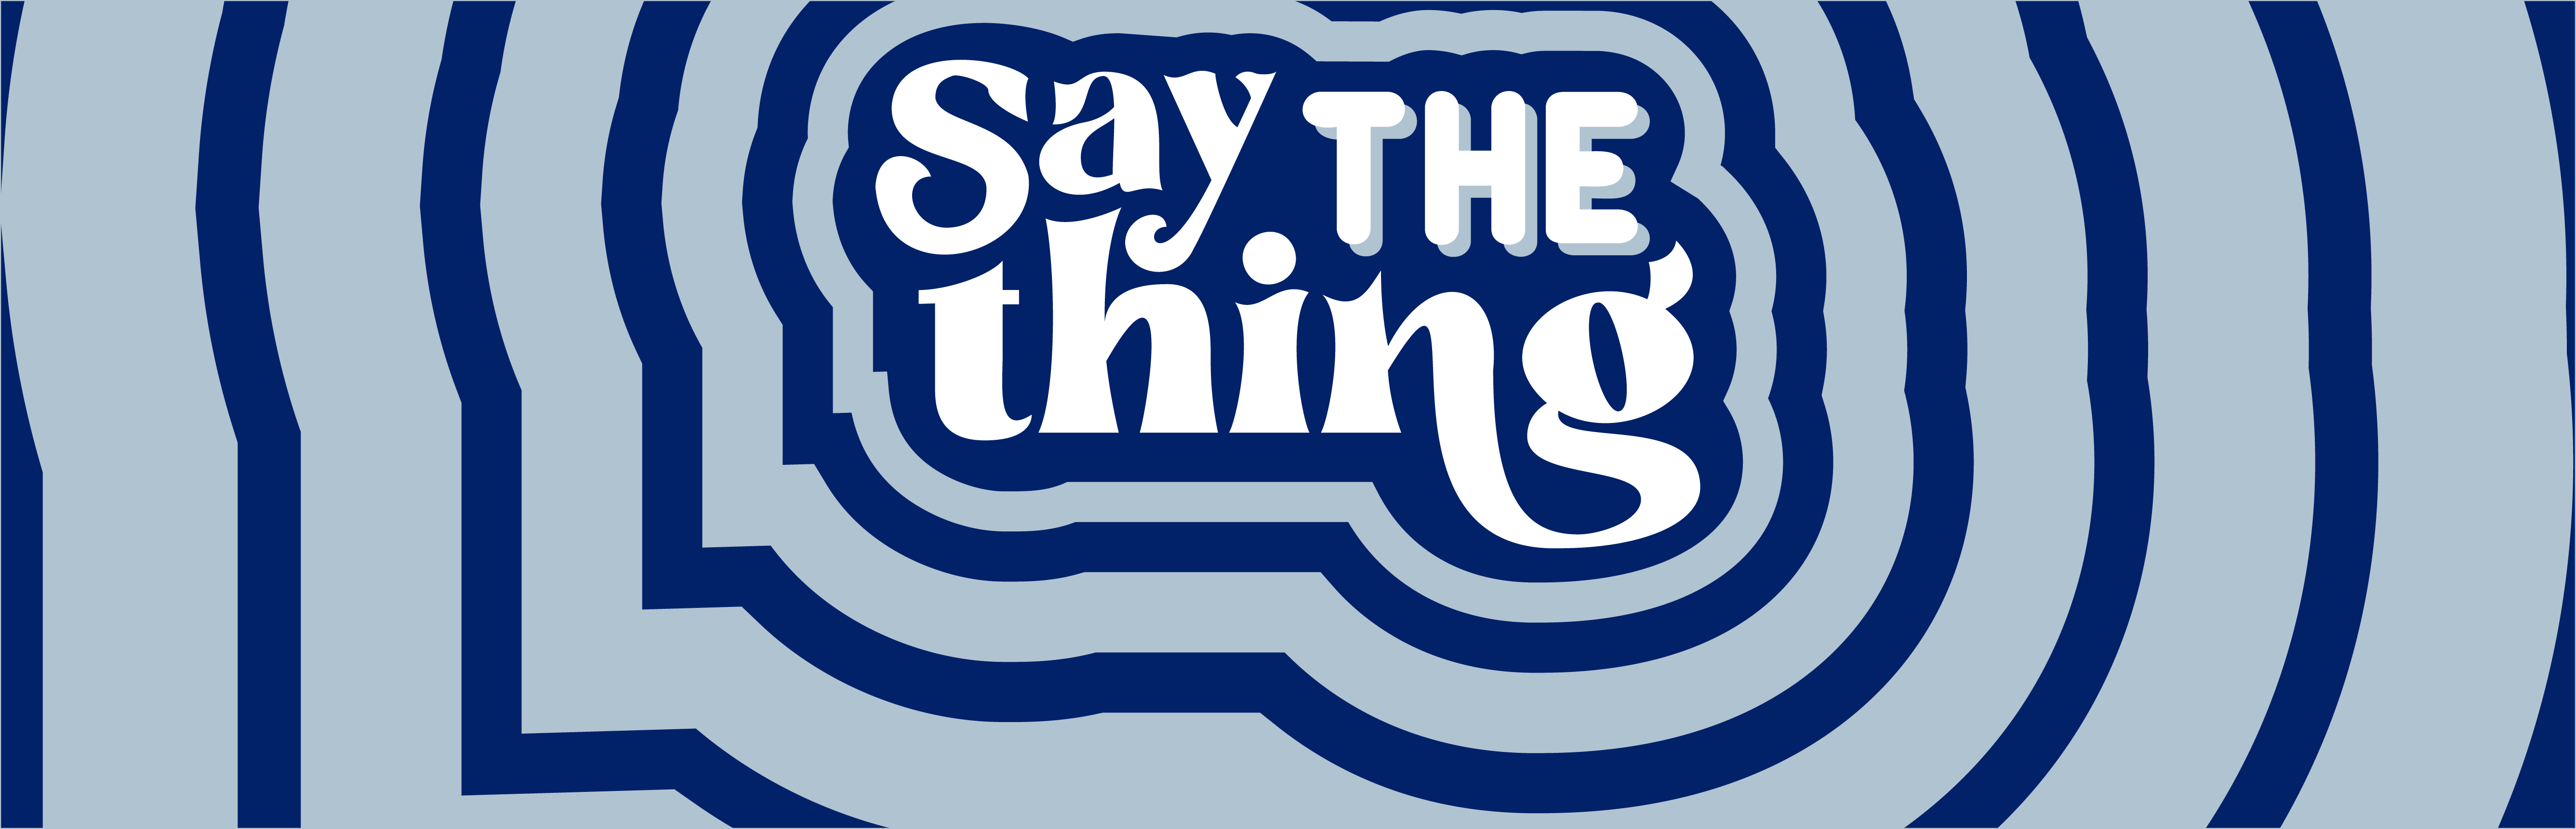 The words "Say the Thing" in a funky 1970s style text with light blue outlines echoing around the text.